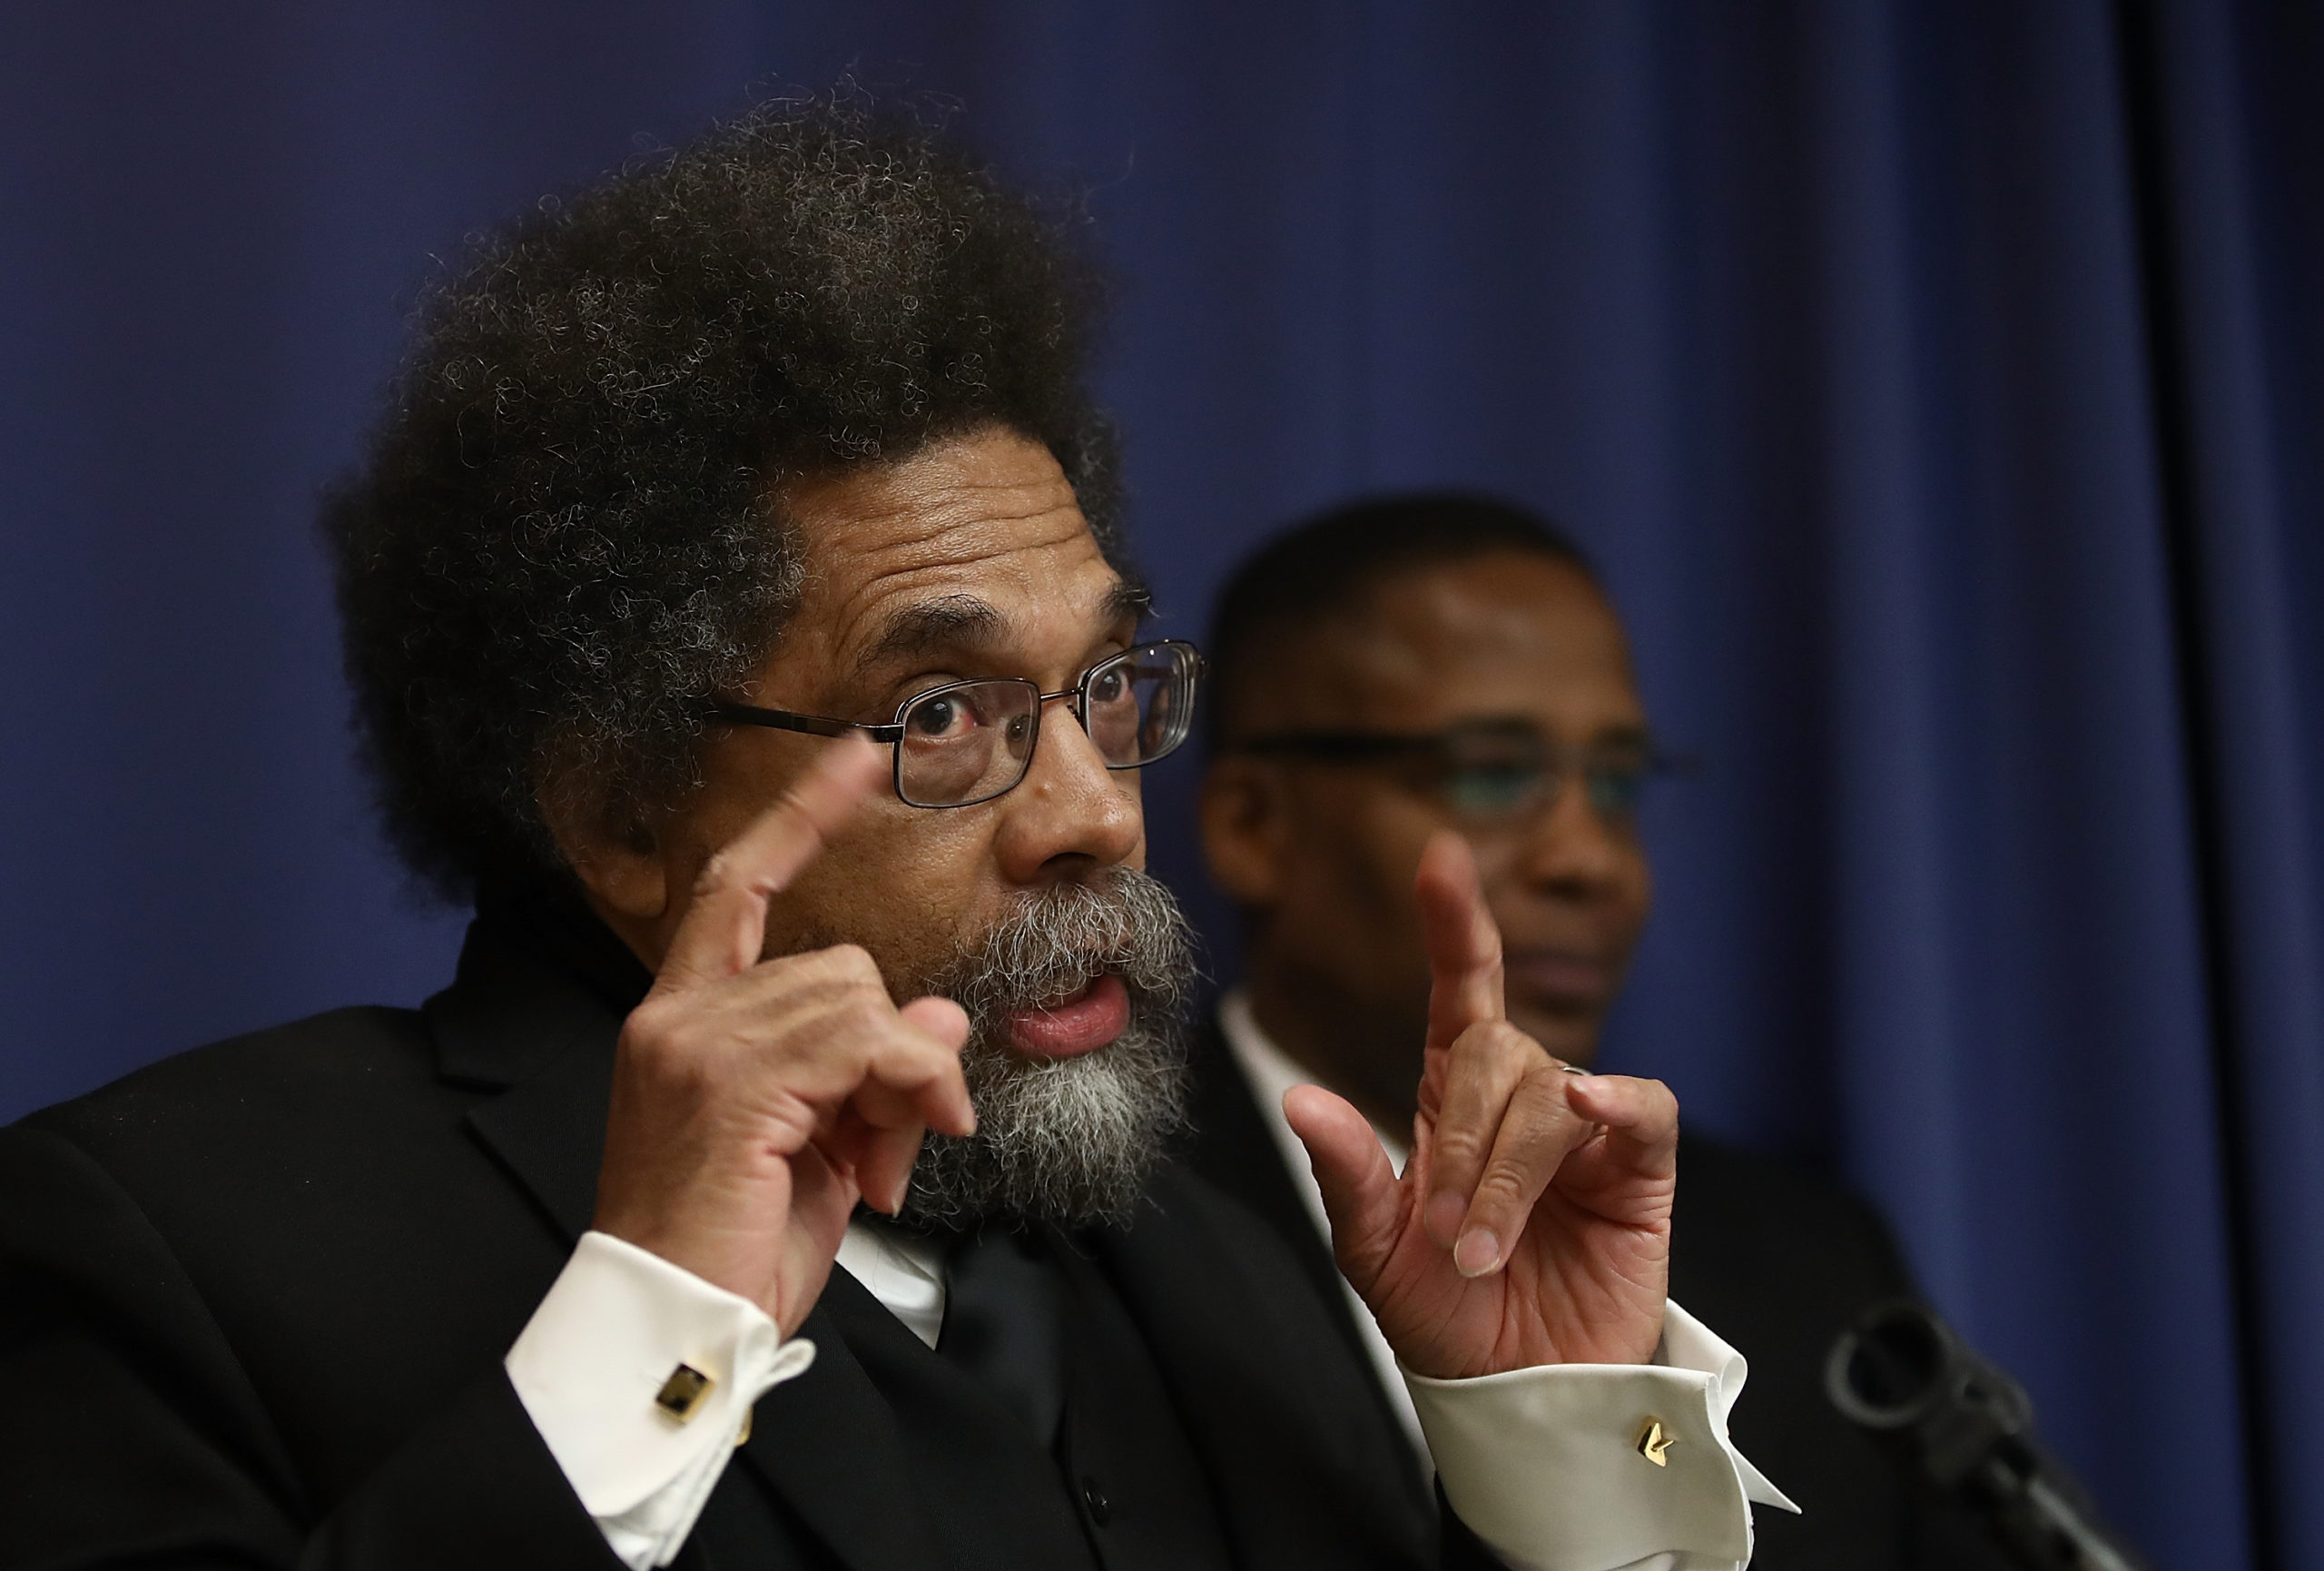 WASHINGTON, DC - FEBRUARY 21: Cornel West, professor of philosophy at Union Theological Seminary, speaks at the National Press Club February 21, 2017 in Washington, DC. West and other African American leaders discussed "the current statements and actions of the president of the United States and their impact on the African American community" during their remarks. Also pictured is Malik Shabazz (R), national president of Black Lawyers for Justice.(Photo by Win McNamee/Getty Images)